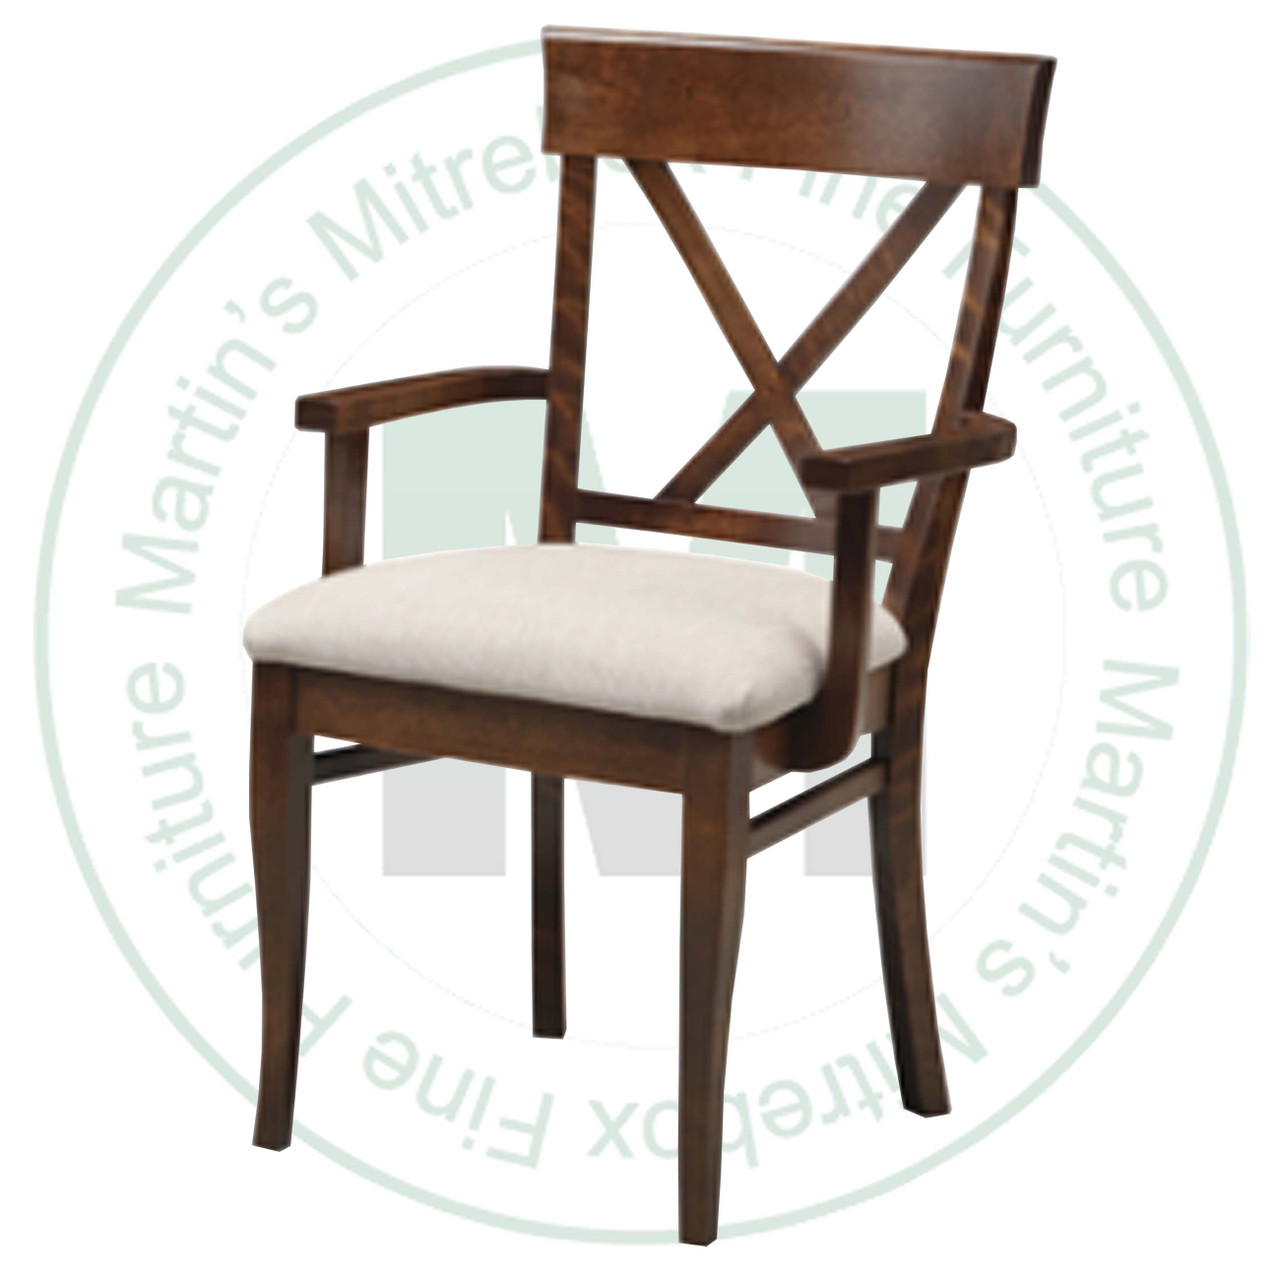 Oak X Back Arm Chair With Upholstered Seat